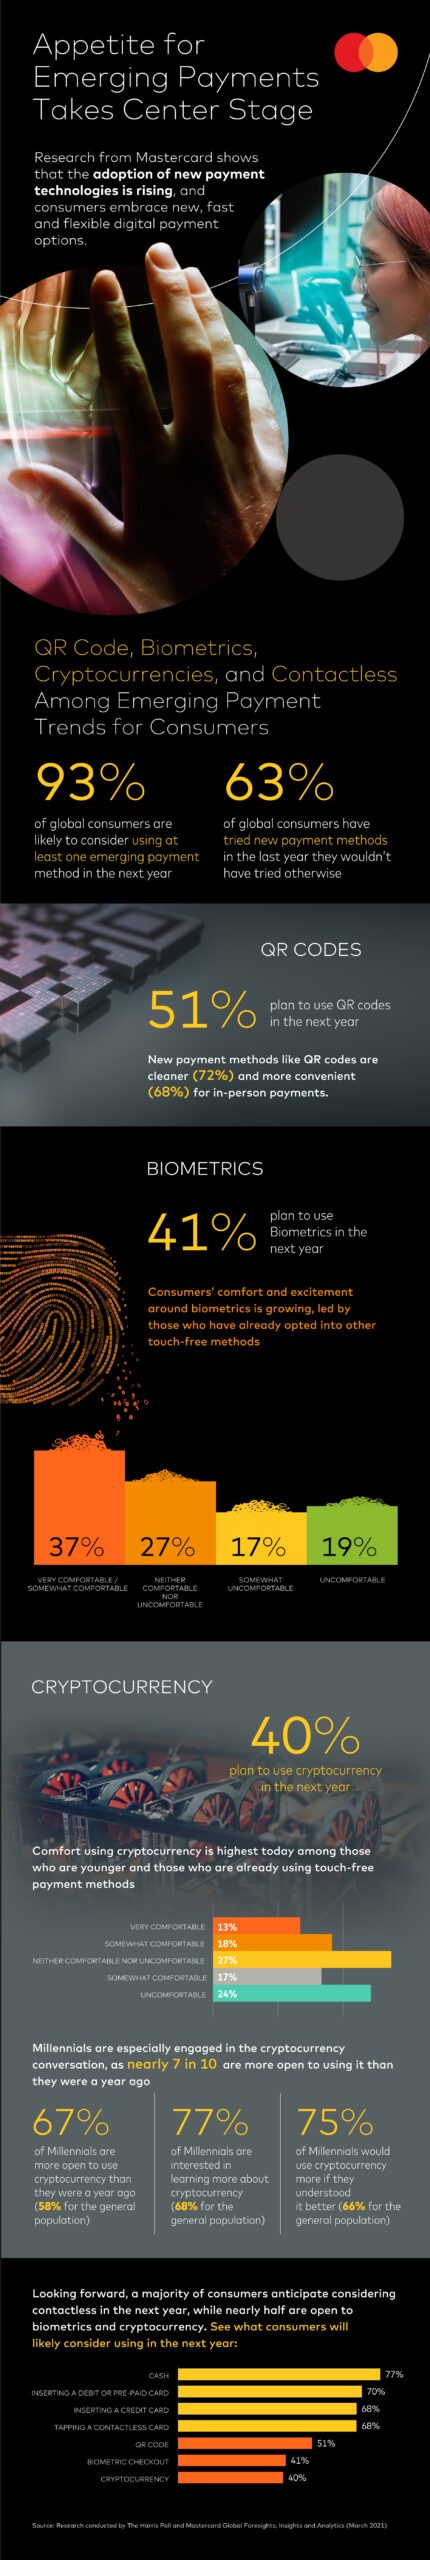 Mastercard New Payments Index 2021 Infographic, Mastercard